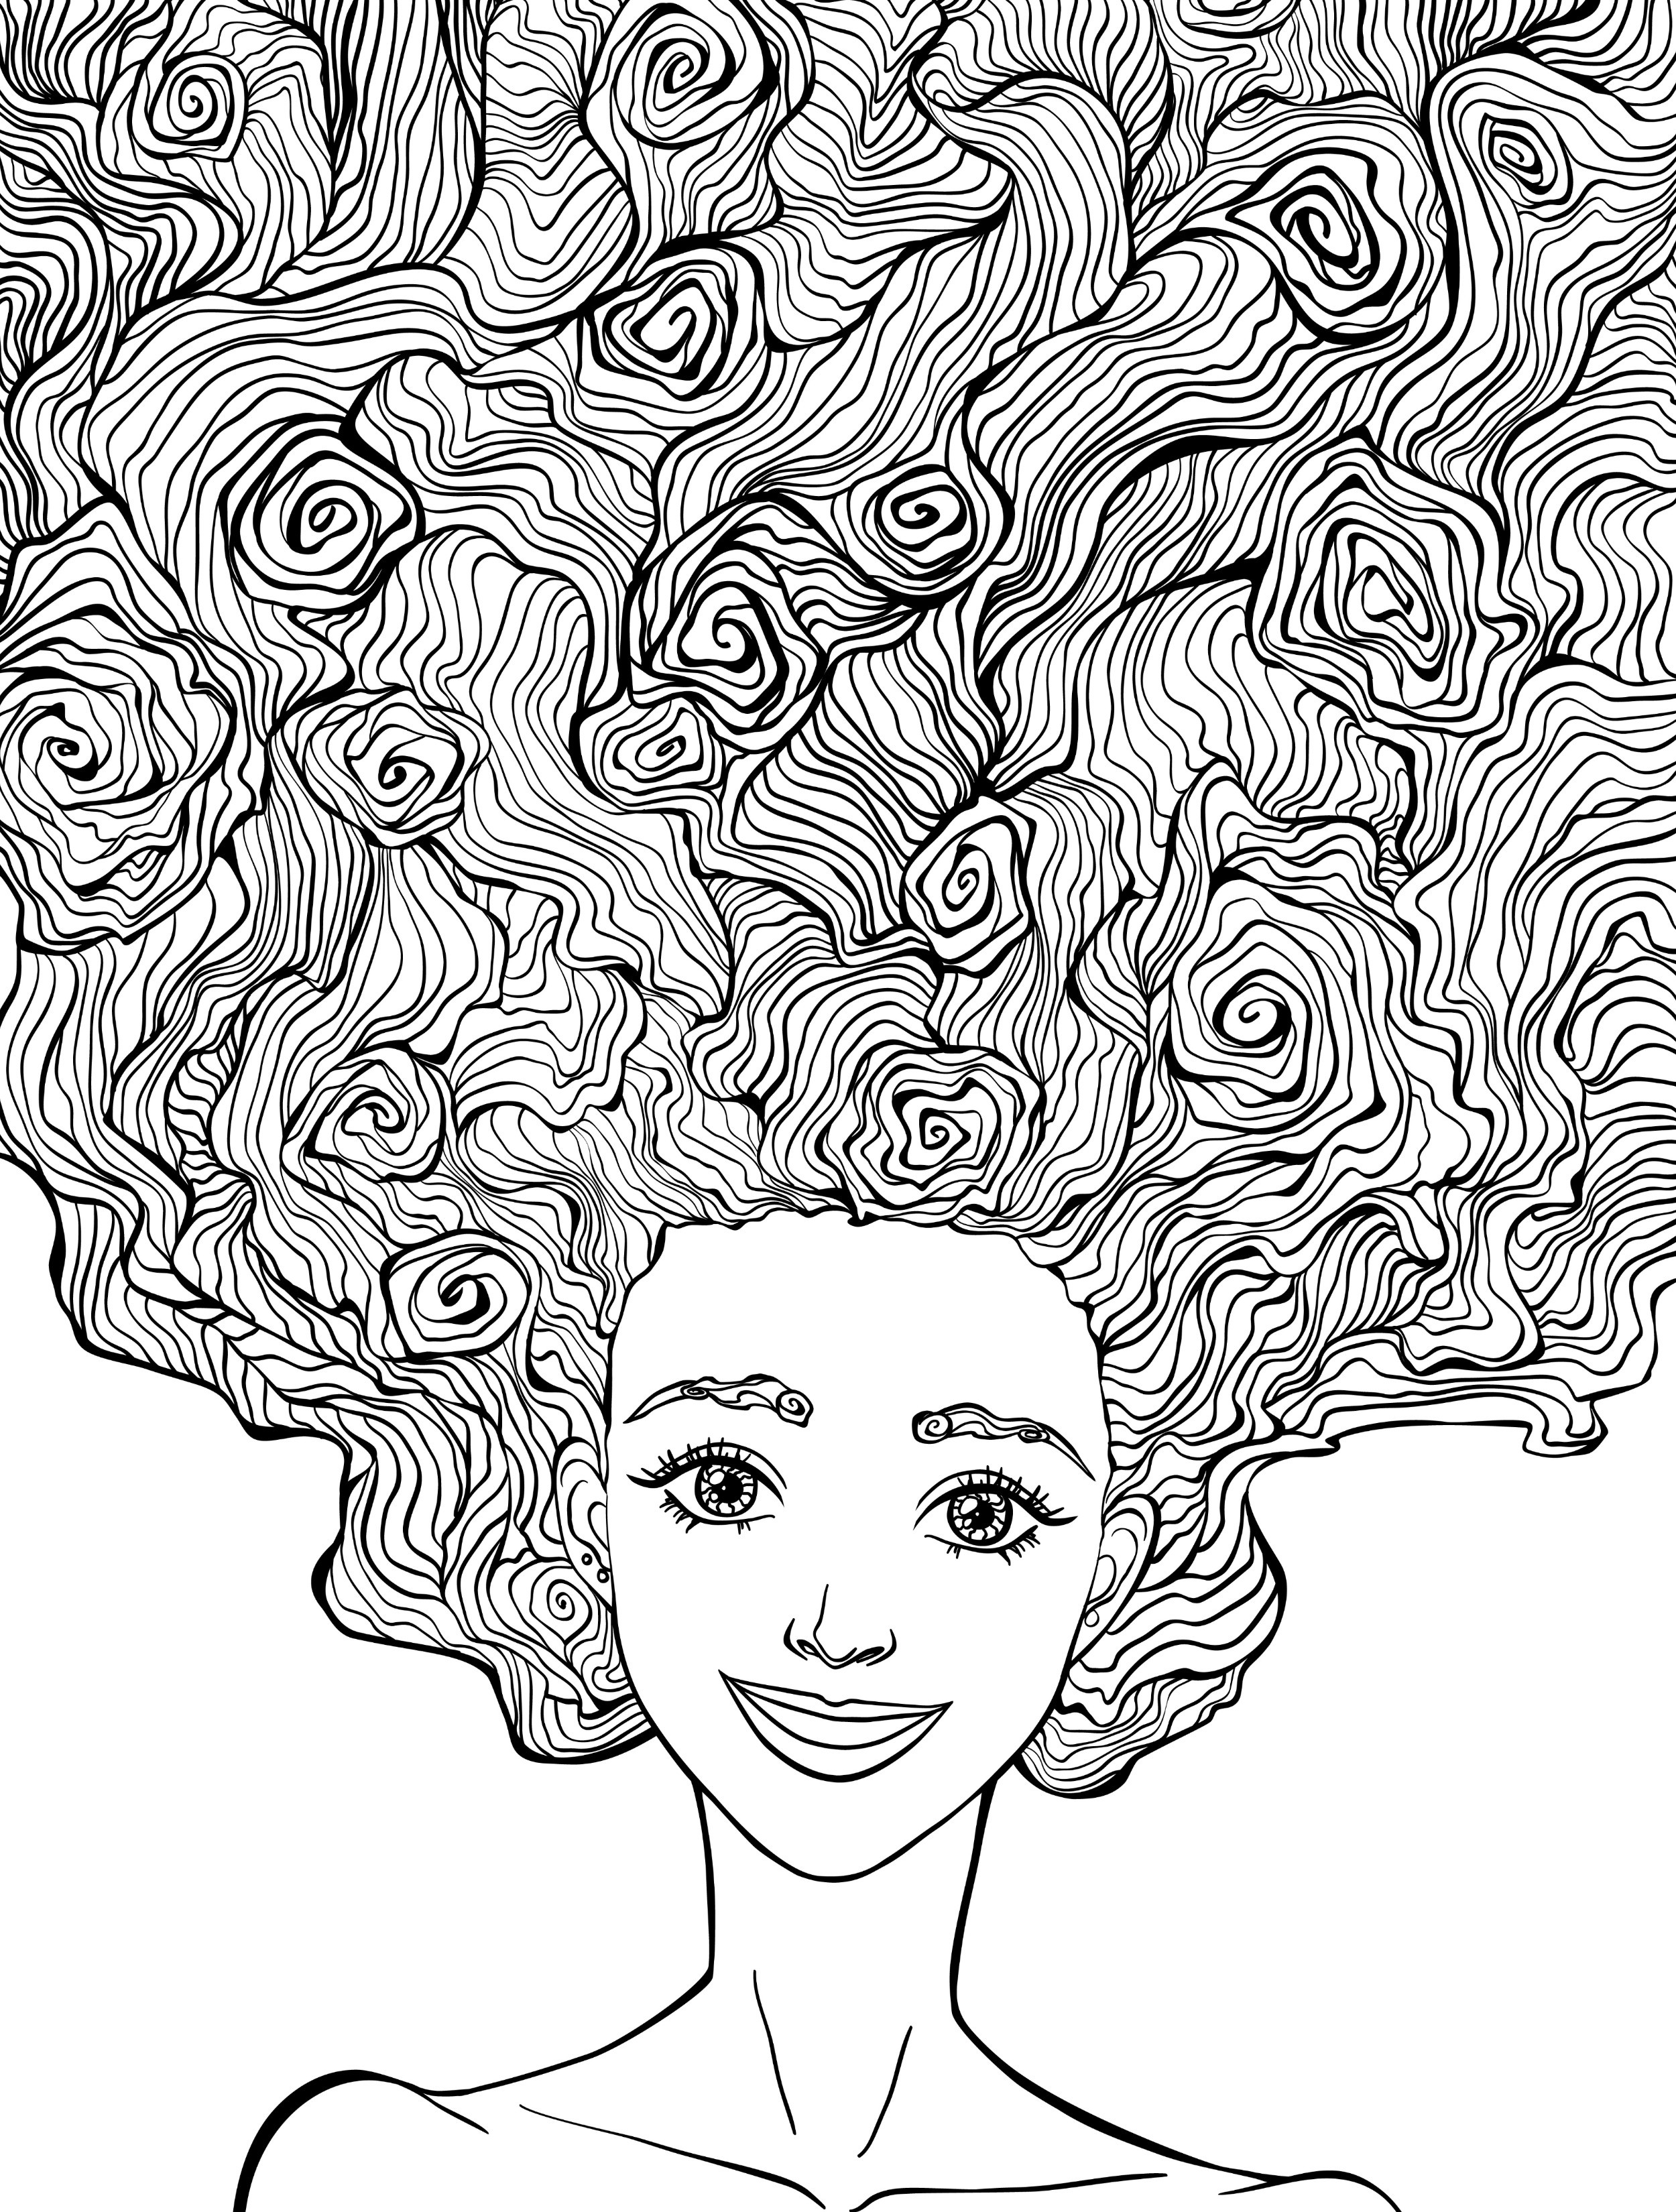 People Coloring Pages For Adults
 10 Crazy Hair Adult Coloring Pages Page 10 of 12 Nerdy